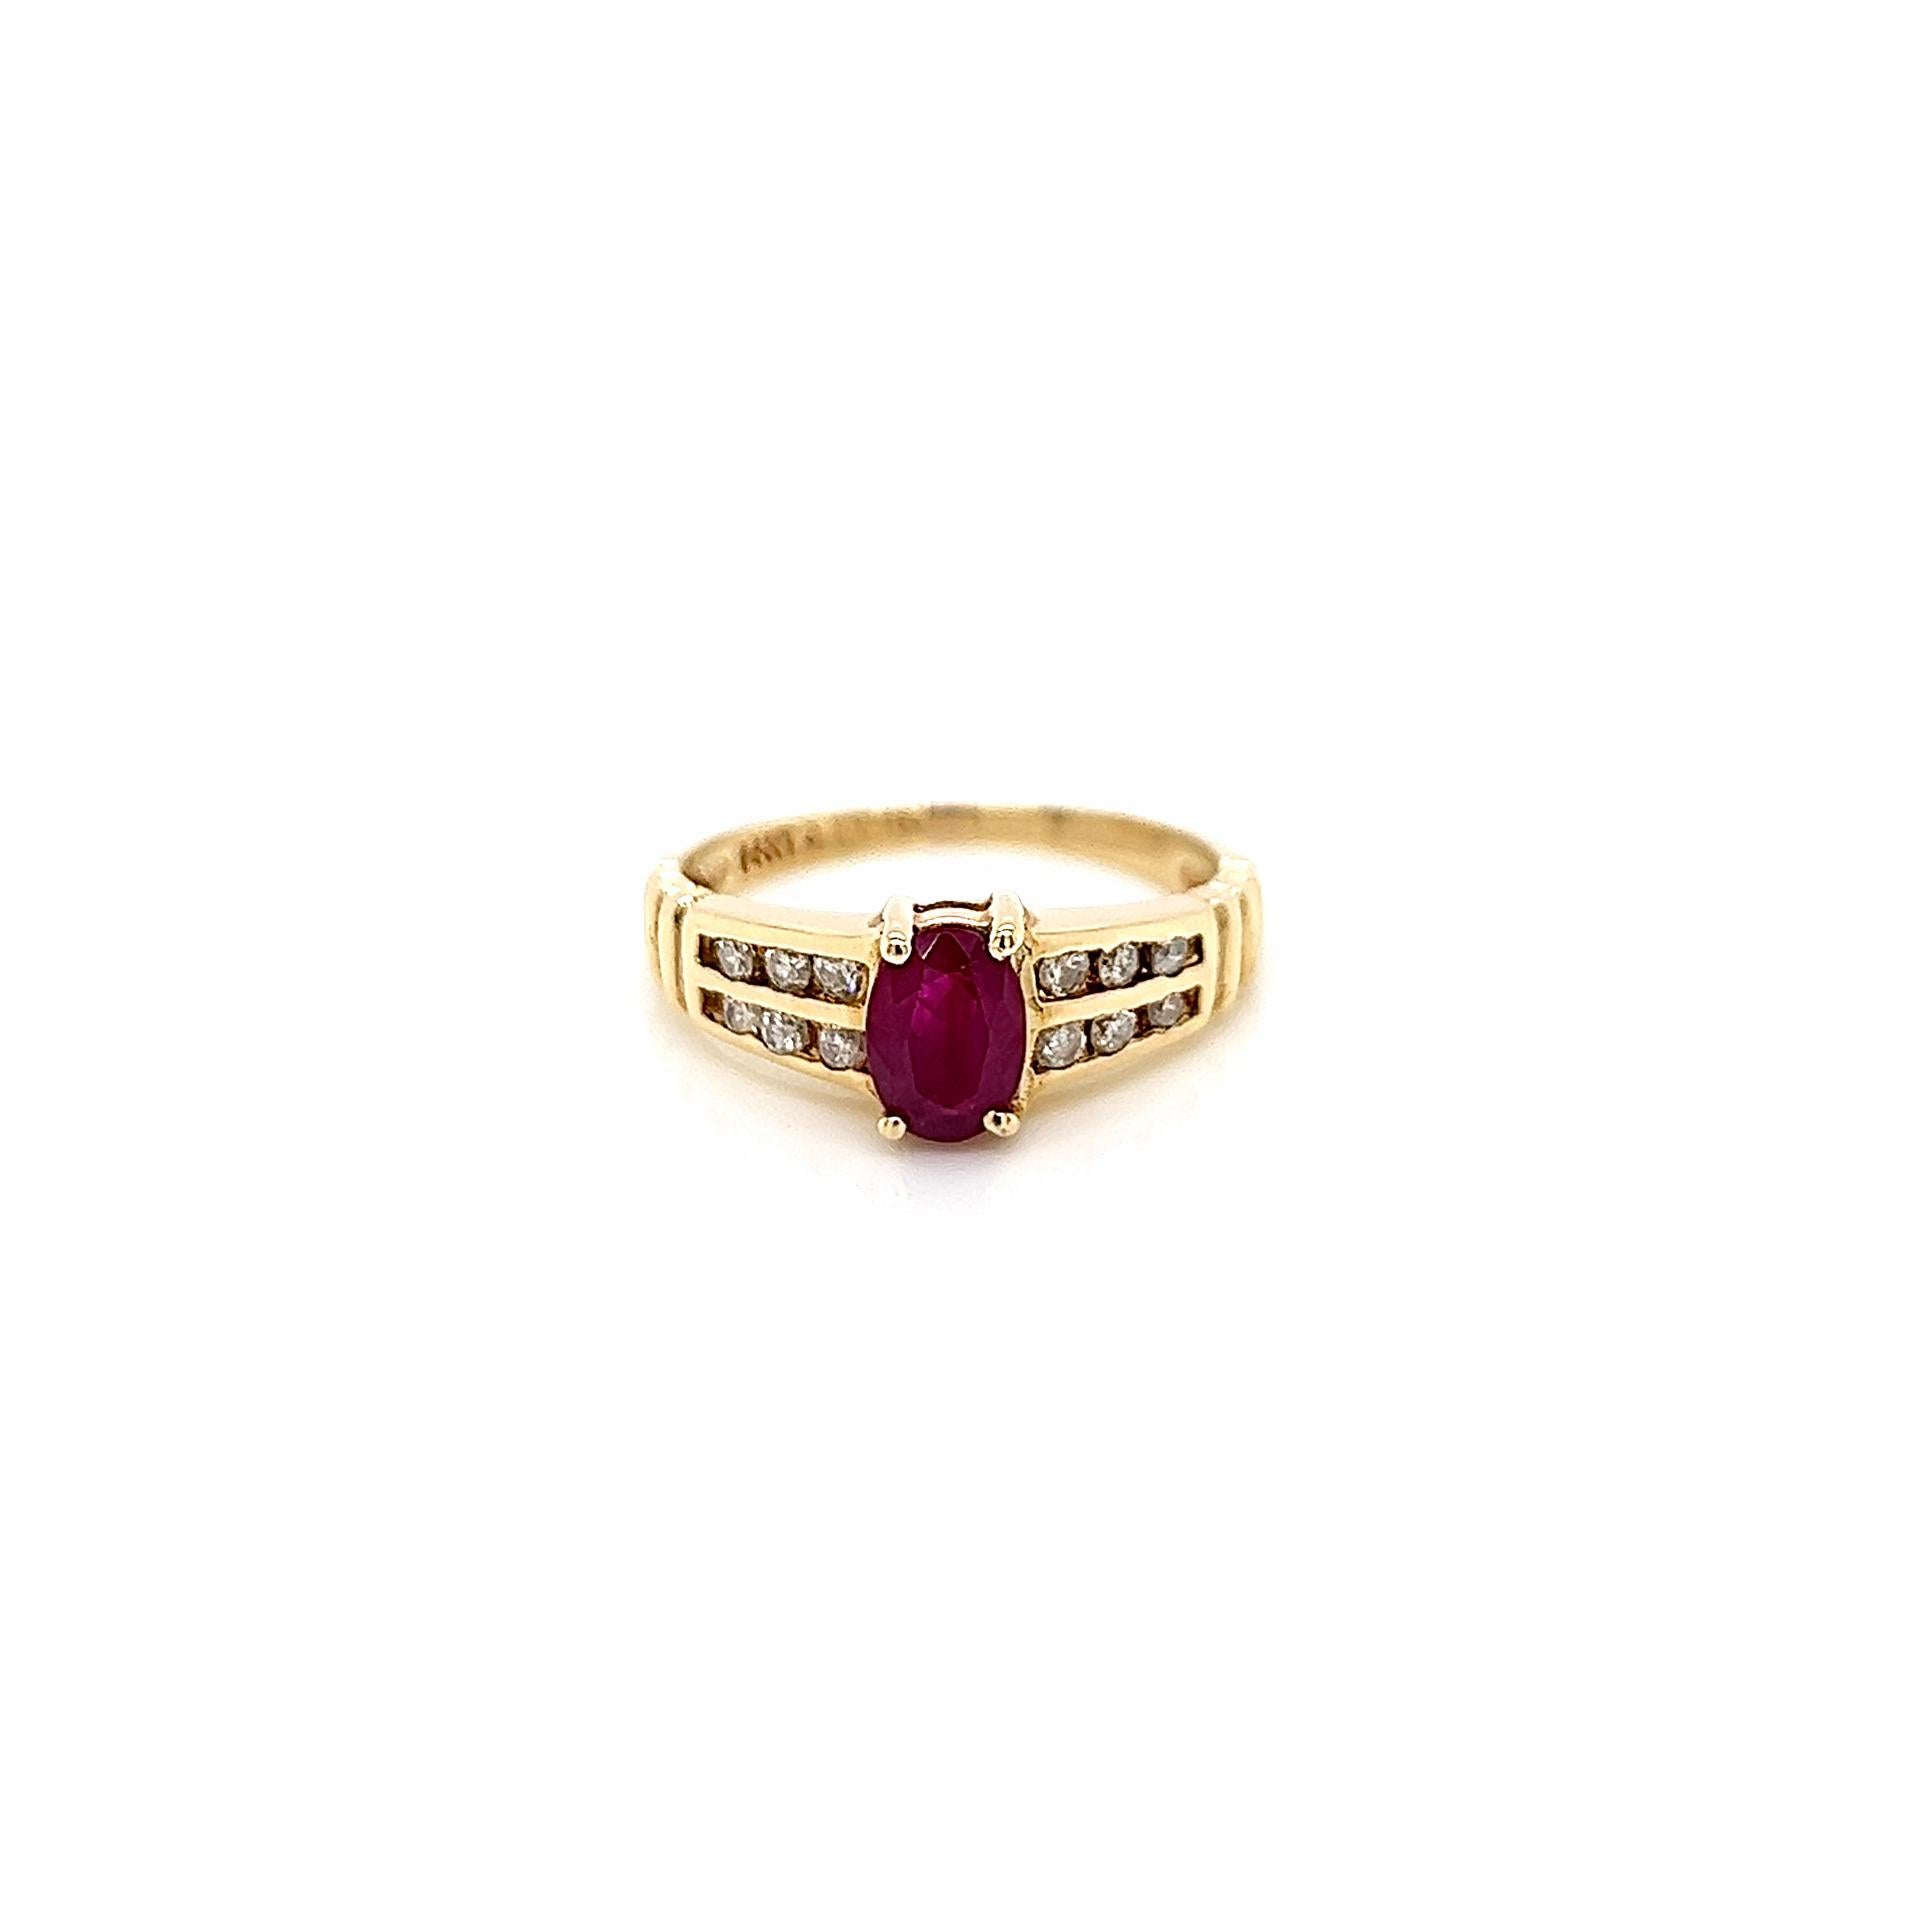 0.88 Total Carat Diamond and Ruby Ladies Ring

-Metal Type: 14K Yellow Gold
-0.18 Carat Round Natural Diamonds, G-H Color, I1 Clarity 
-0.70 Carat Oval Cut Natural Ruby 
-Size 7.0

Resize is available. Just contact us before ordering, the price may